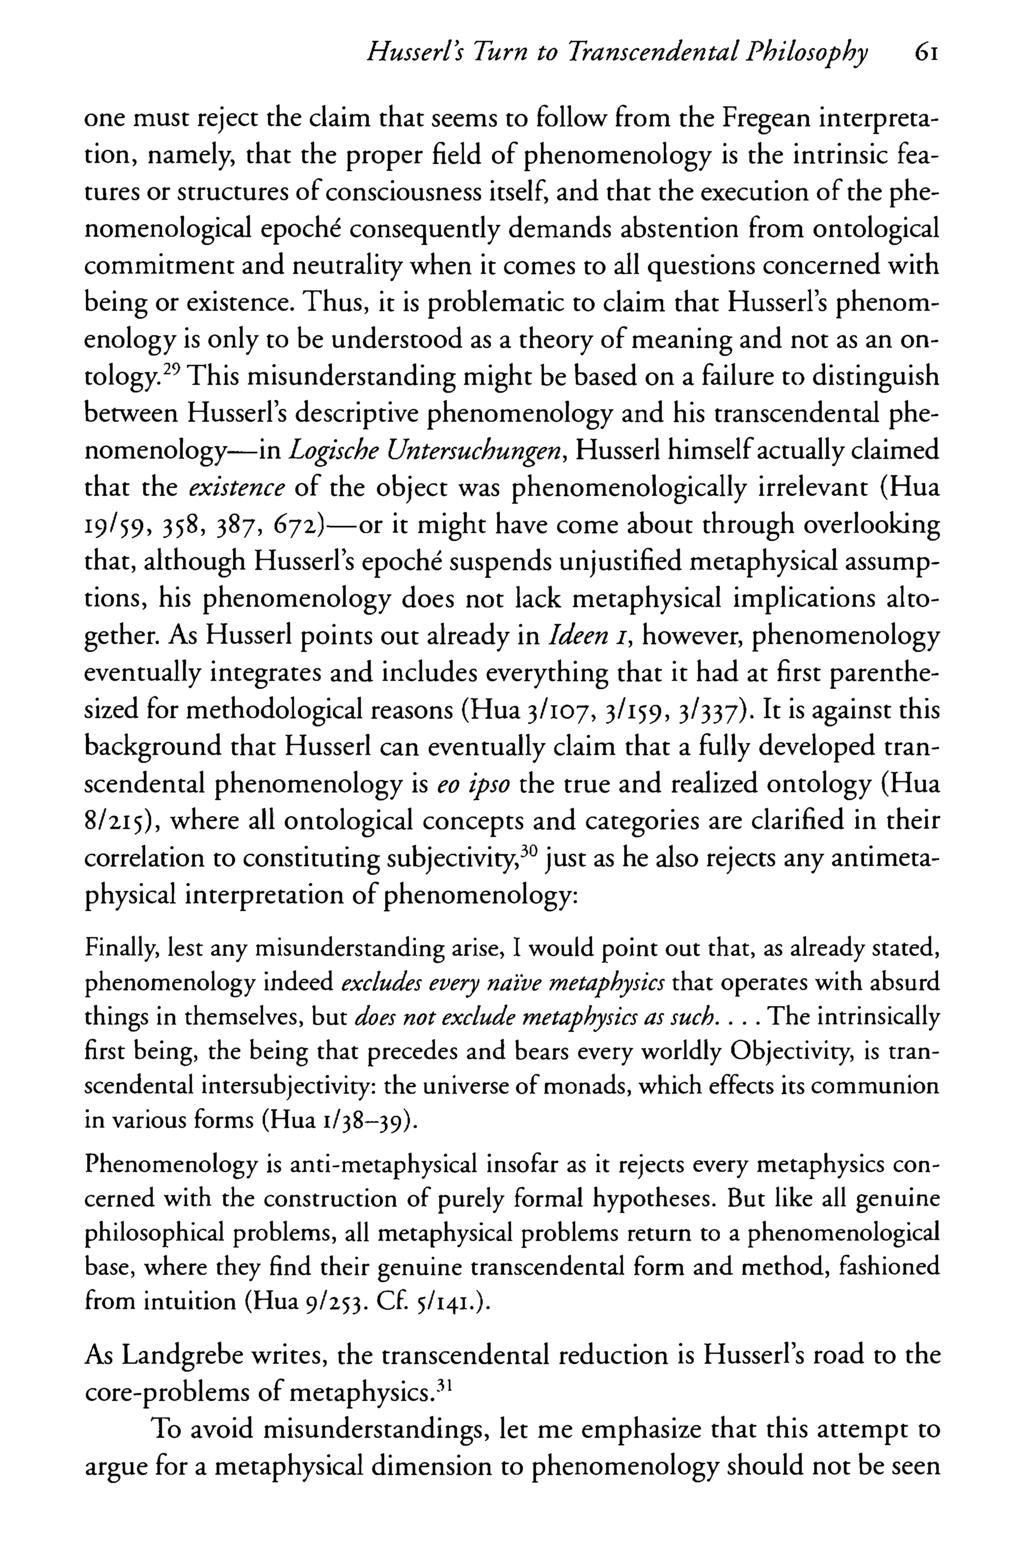 Husserl's Turn to Transcendental Philosophy 61 one must reject the claim that seems to follow from the Fregean interpretation, namely, that the proper field of phenomenology is the intrinsic features